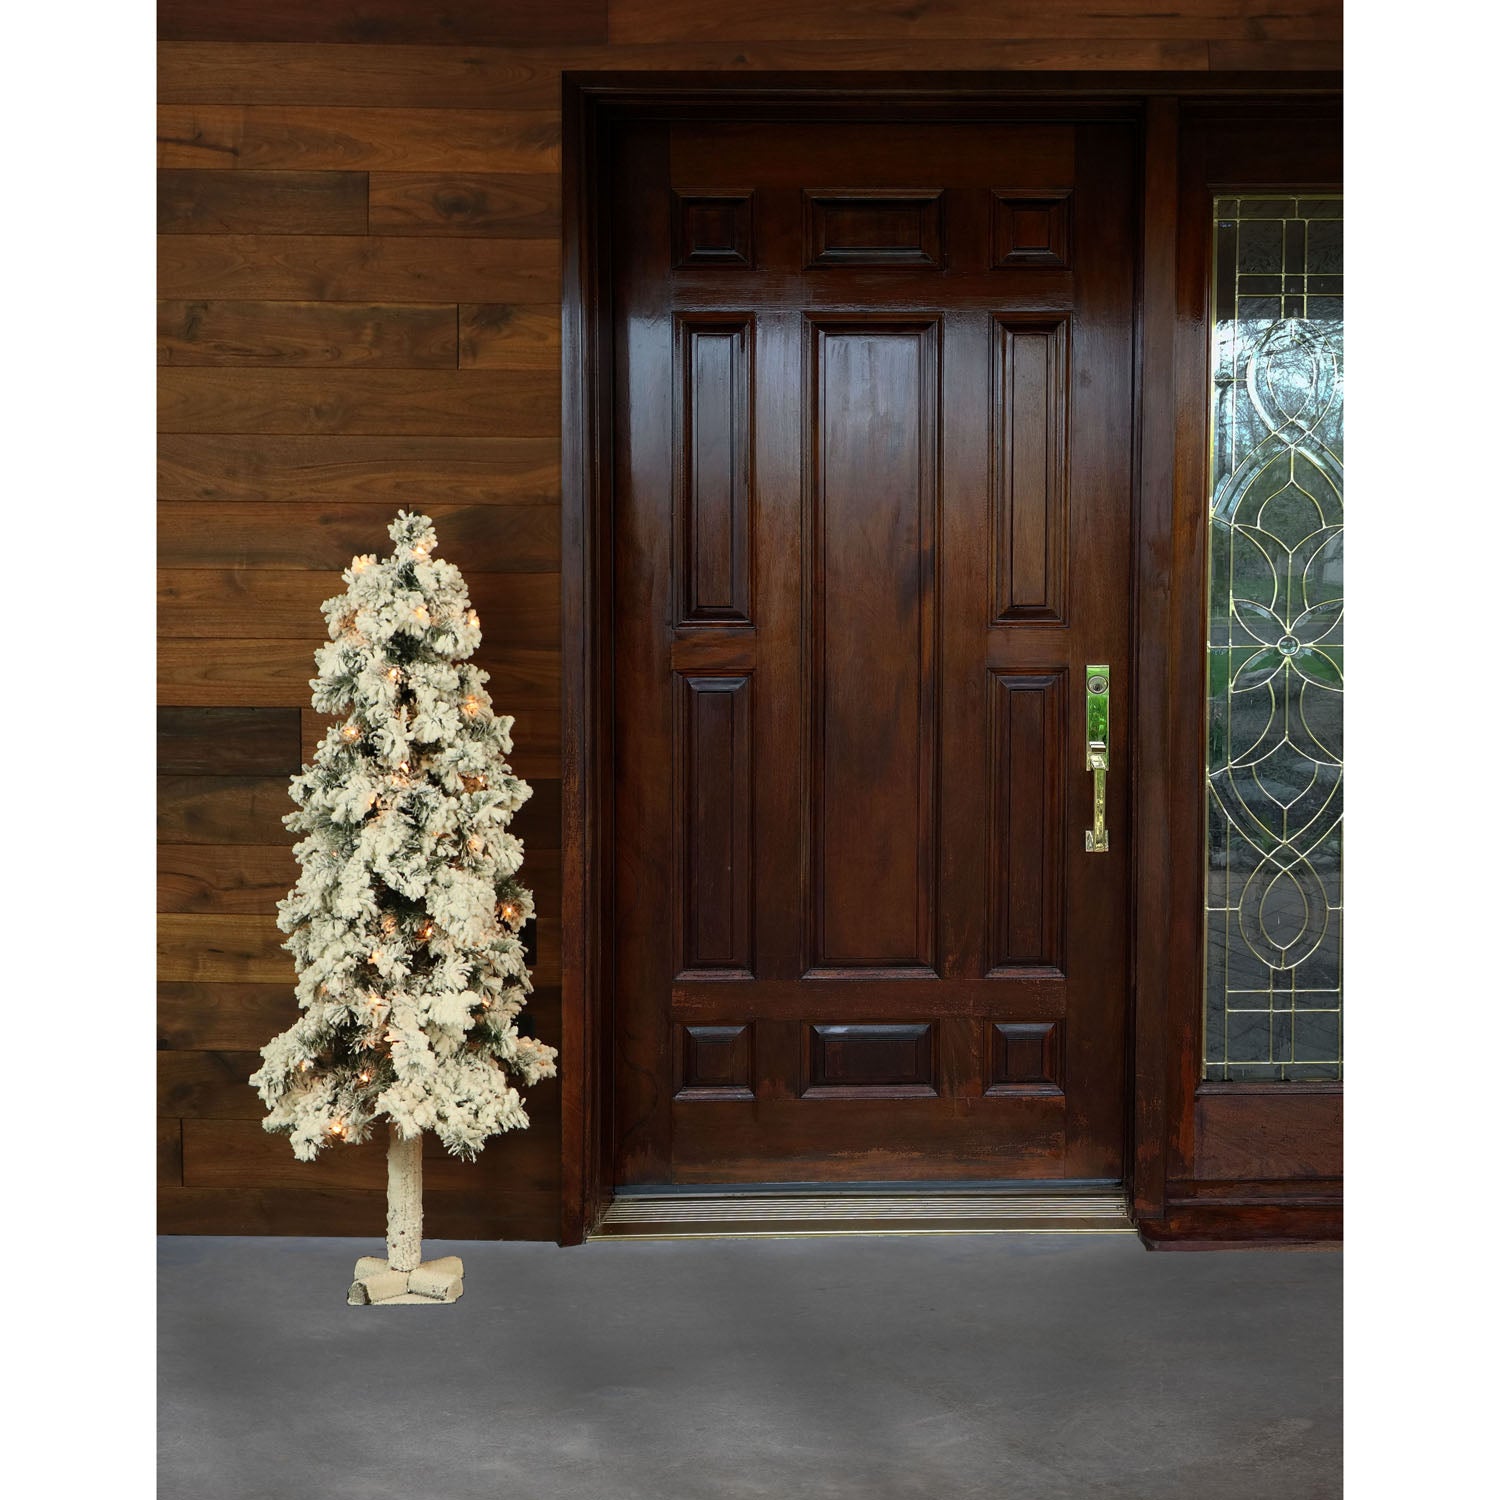 Fraser Hill Farm -  Set of Two 4-Ft. Snowy Alpine Trees with Clear Lights